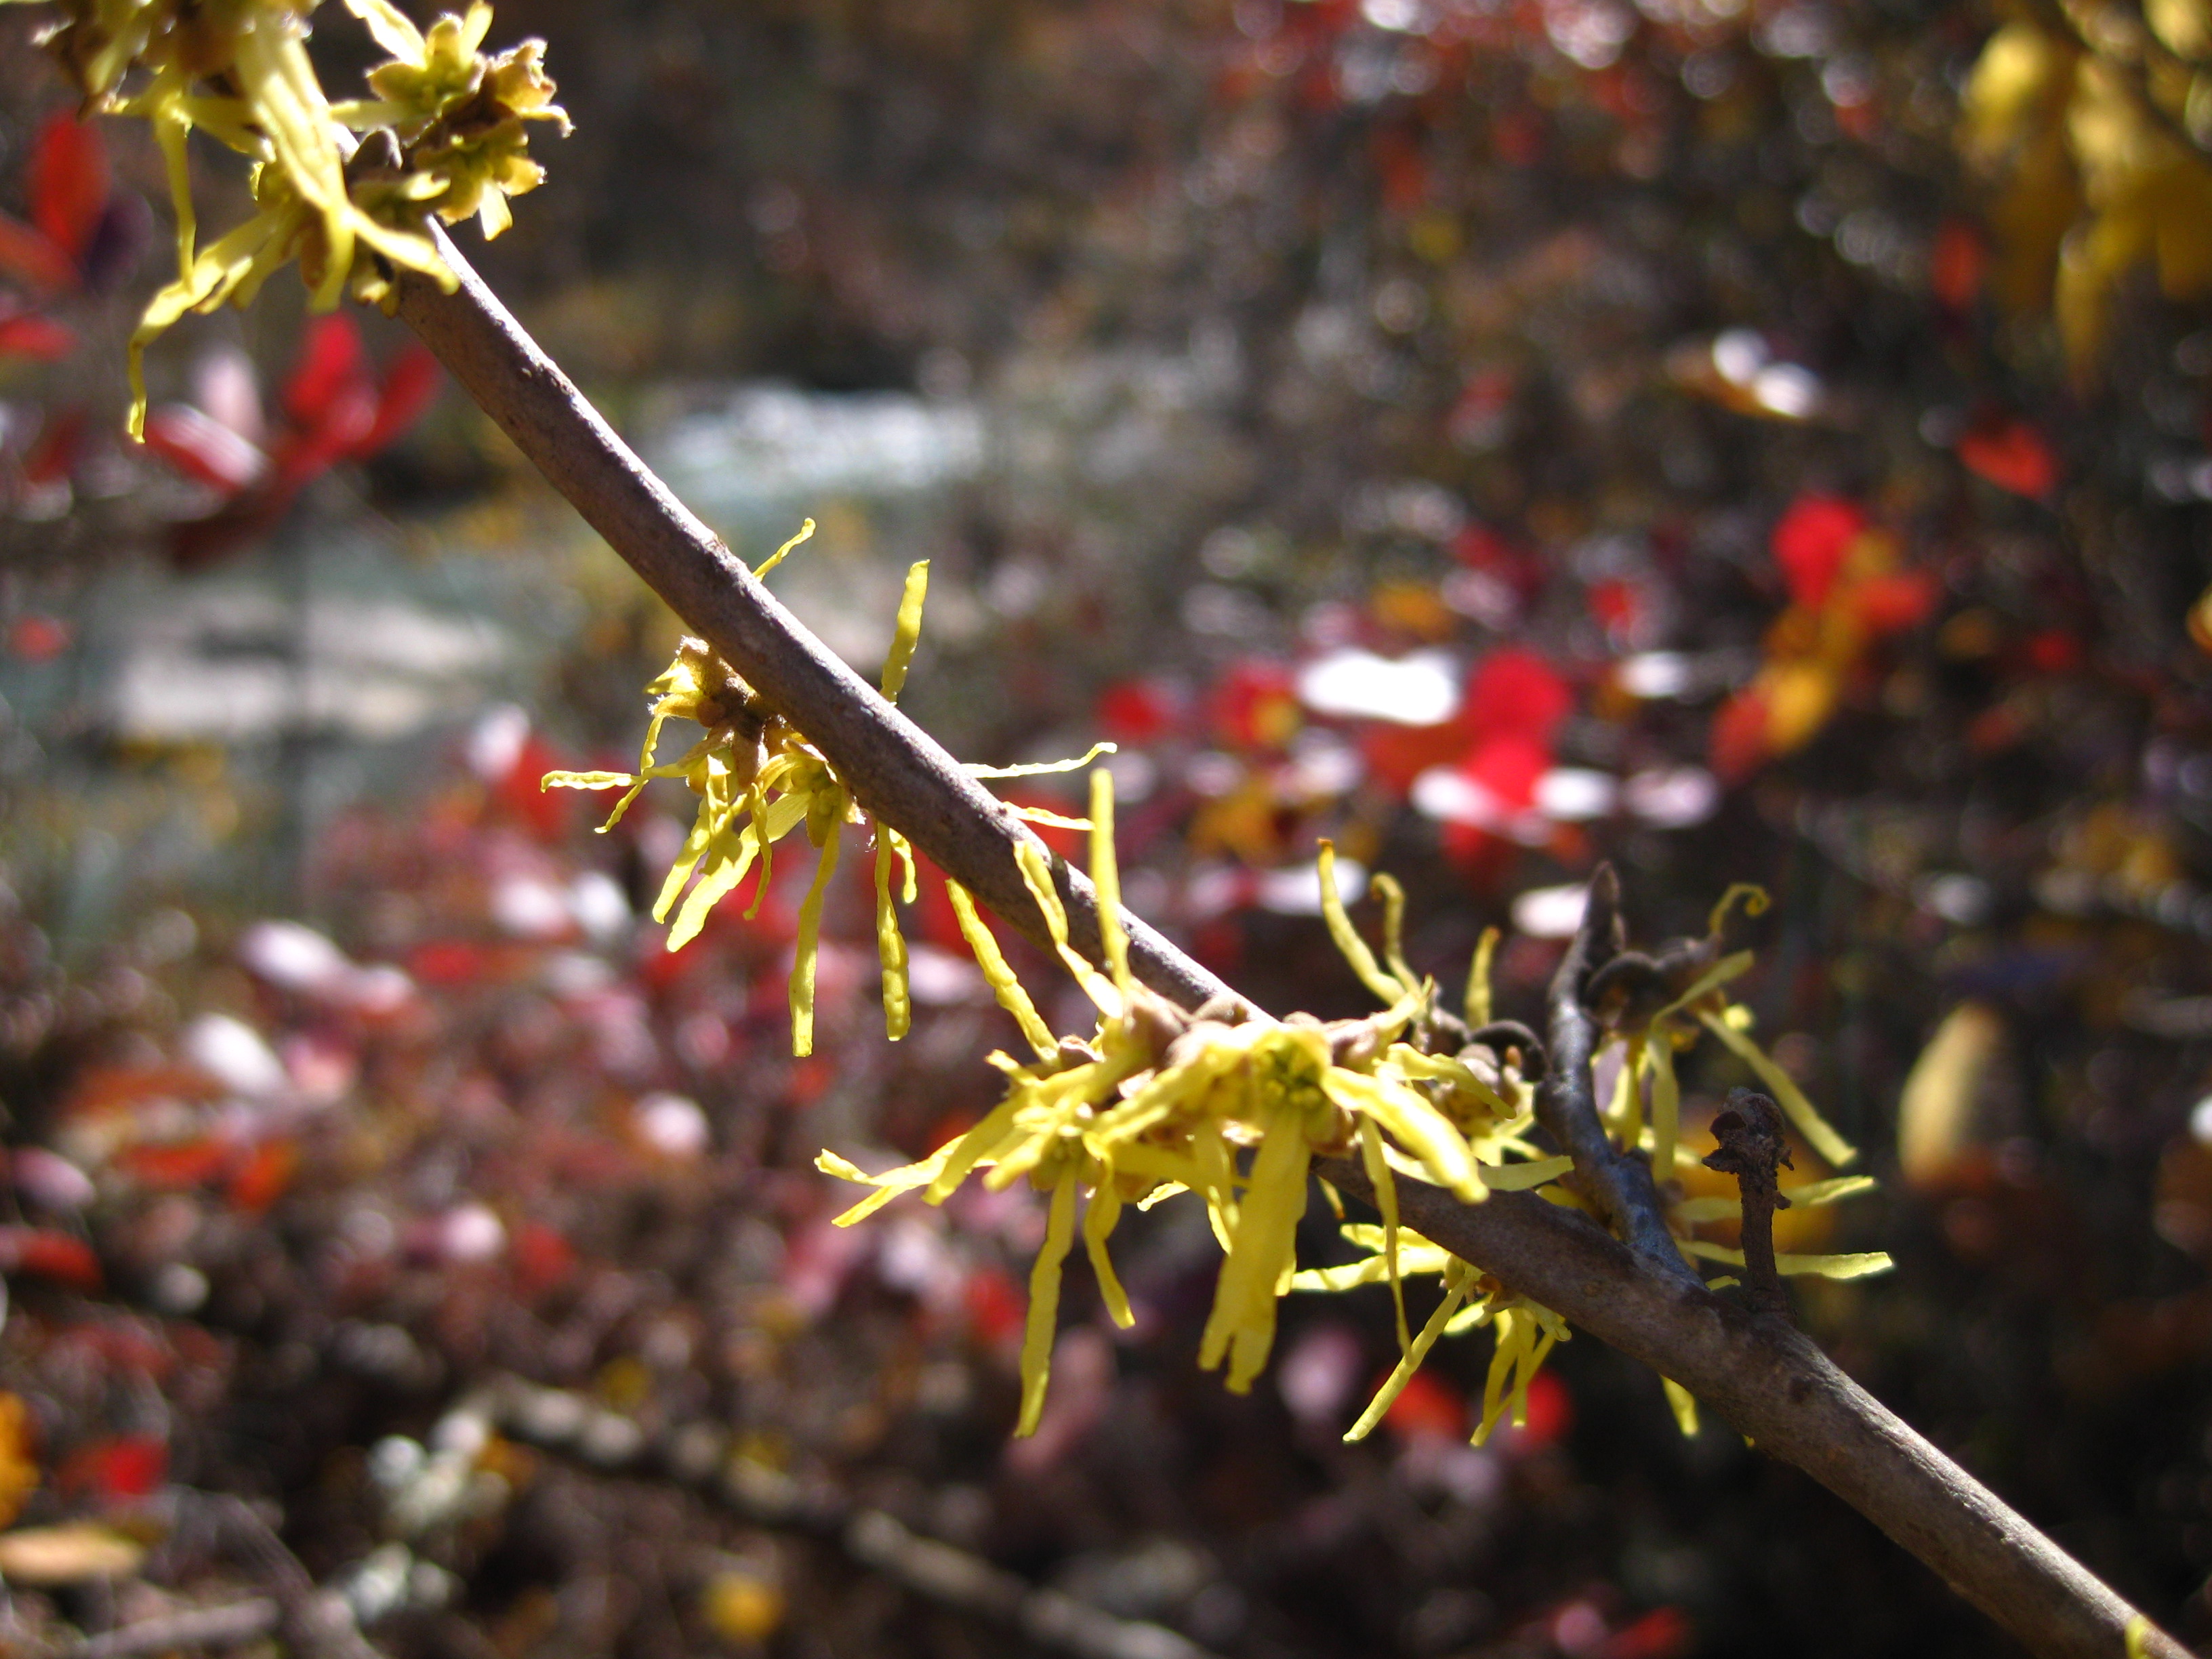 The common witchhazel blooms from October through December and is always a delight to find in wild places.